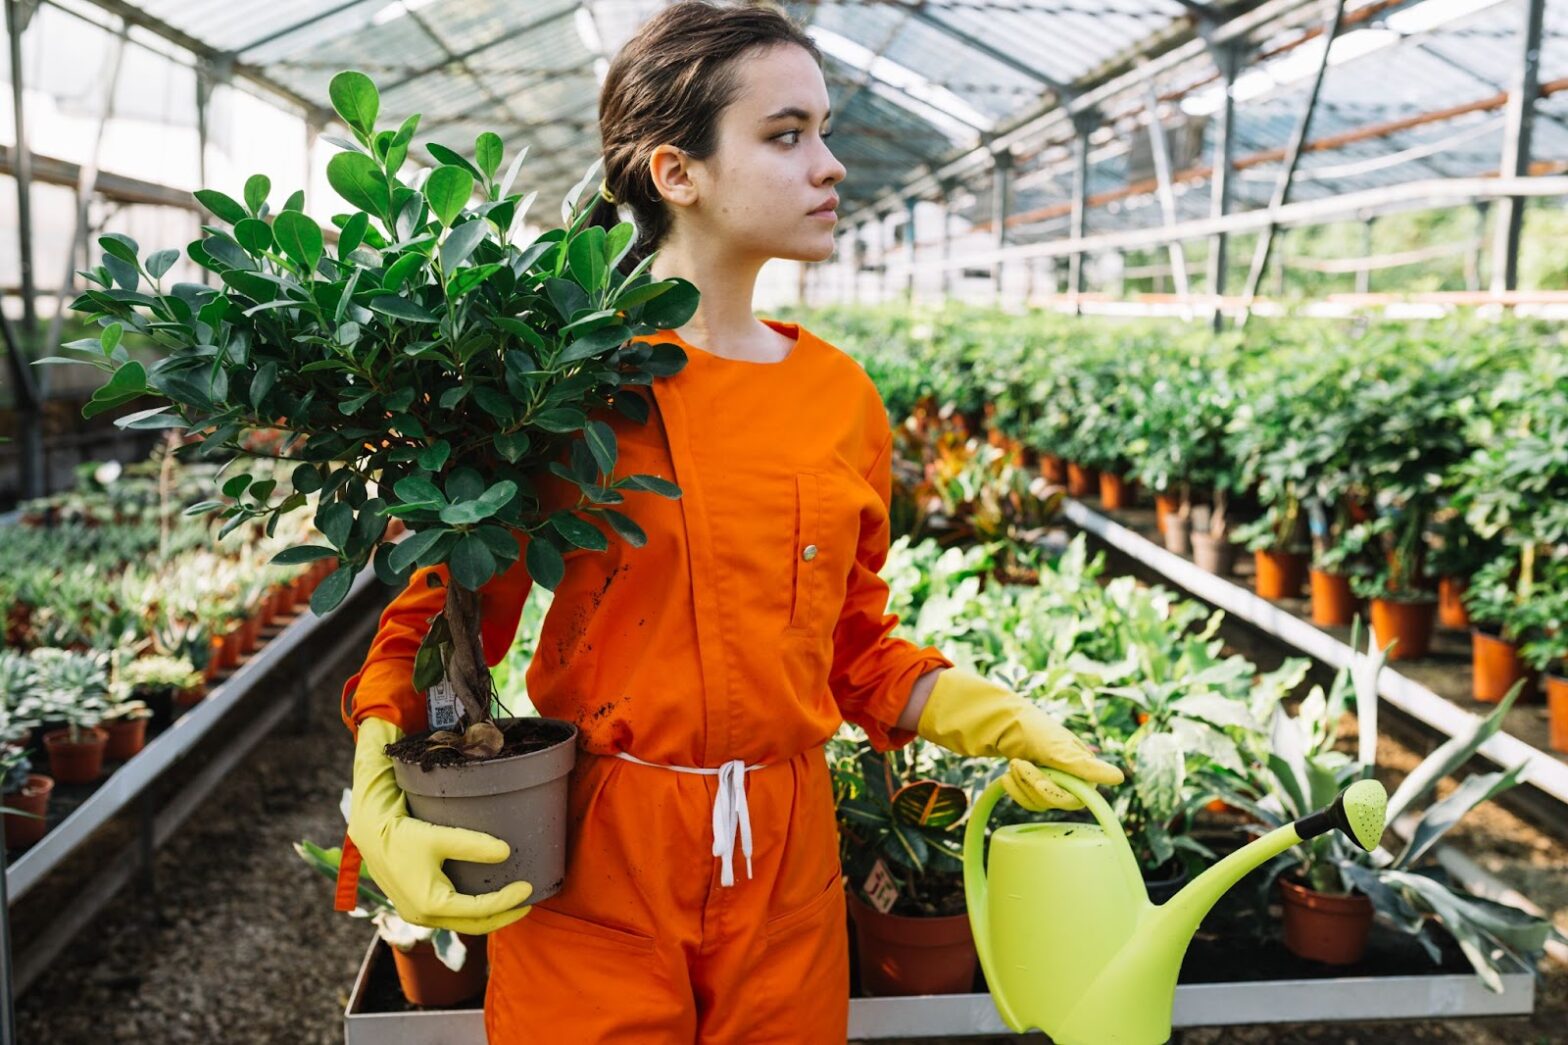 Female gardener holding potted plant and watering can in greenhouse